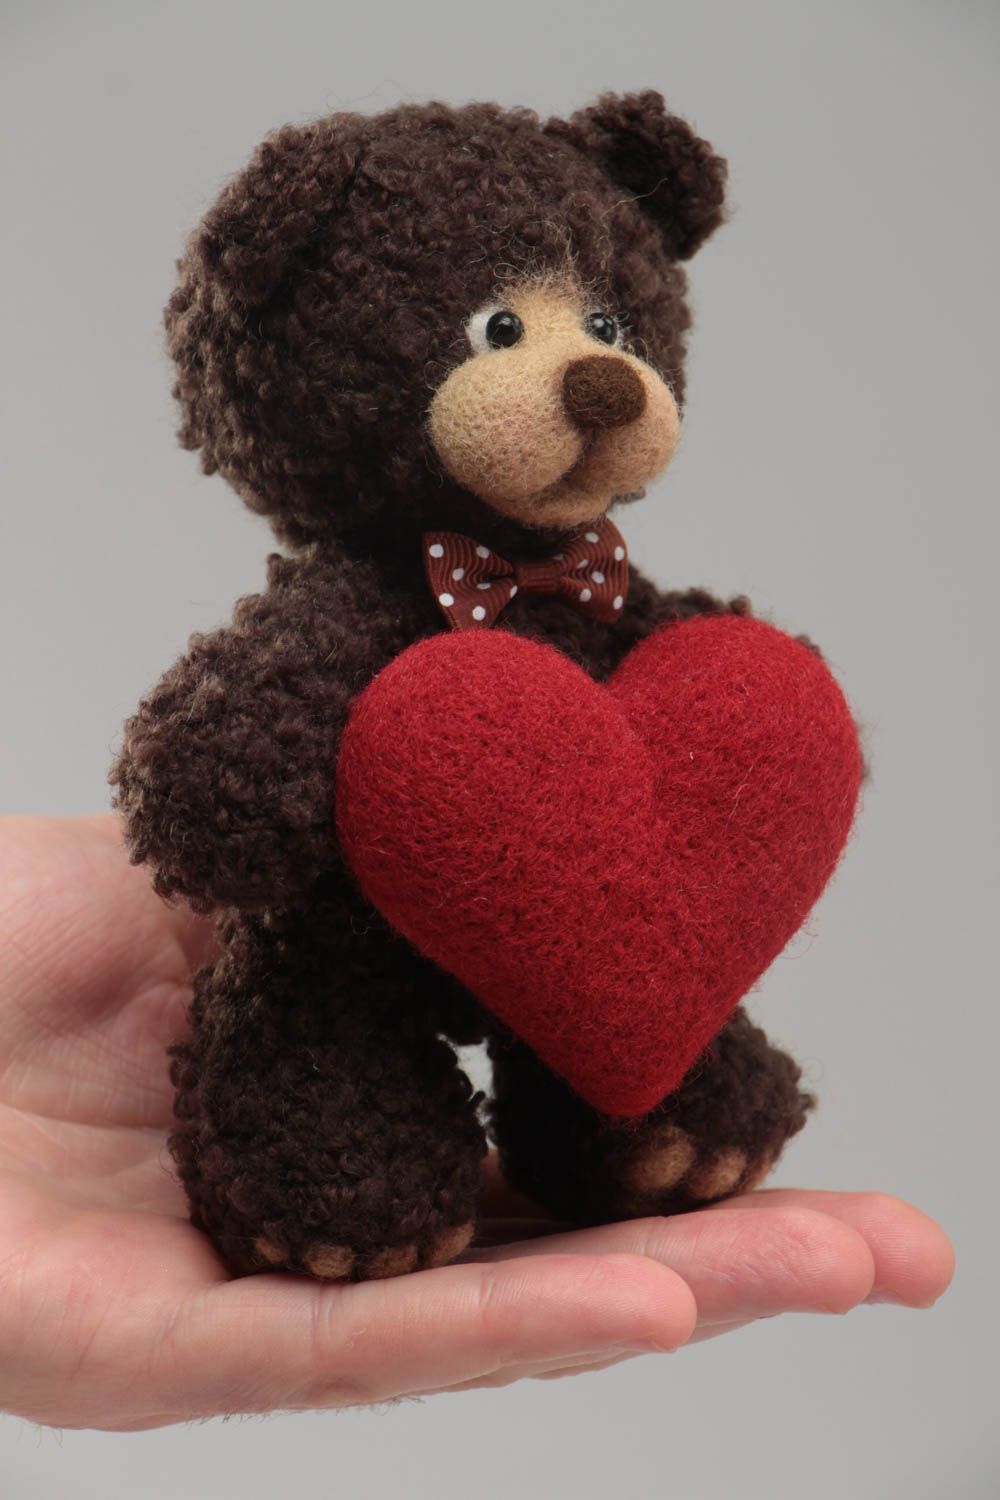 Handmade soft toy crocheted of wool and yarns brown bear with big red heart photo 5